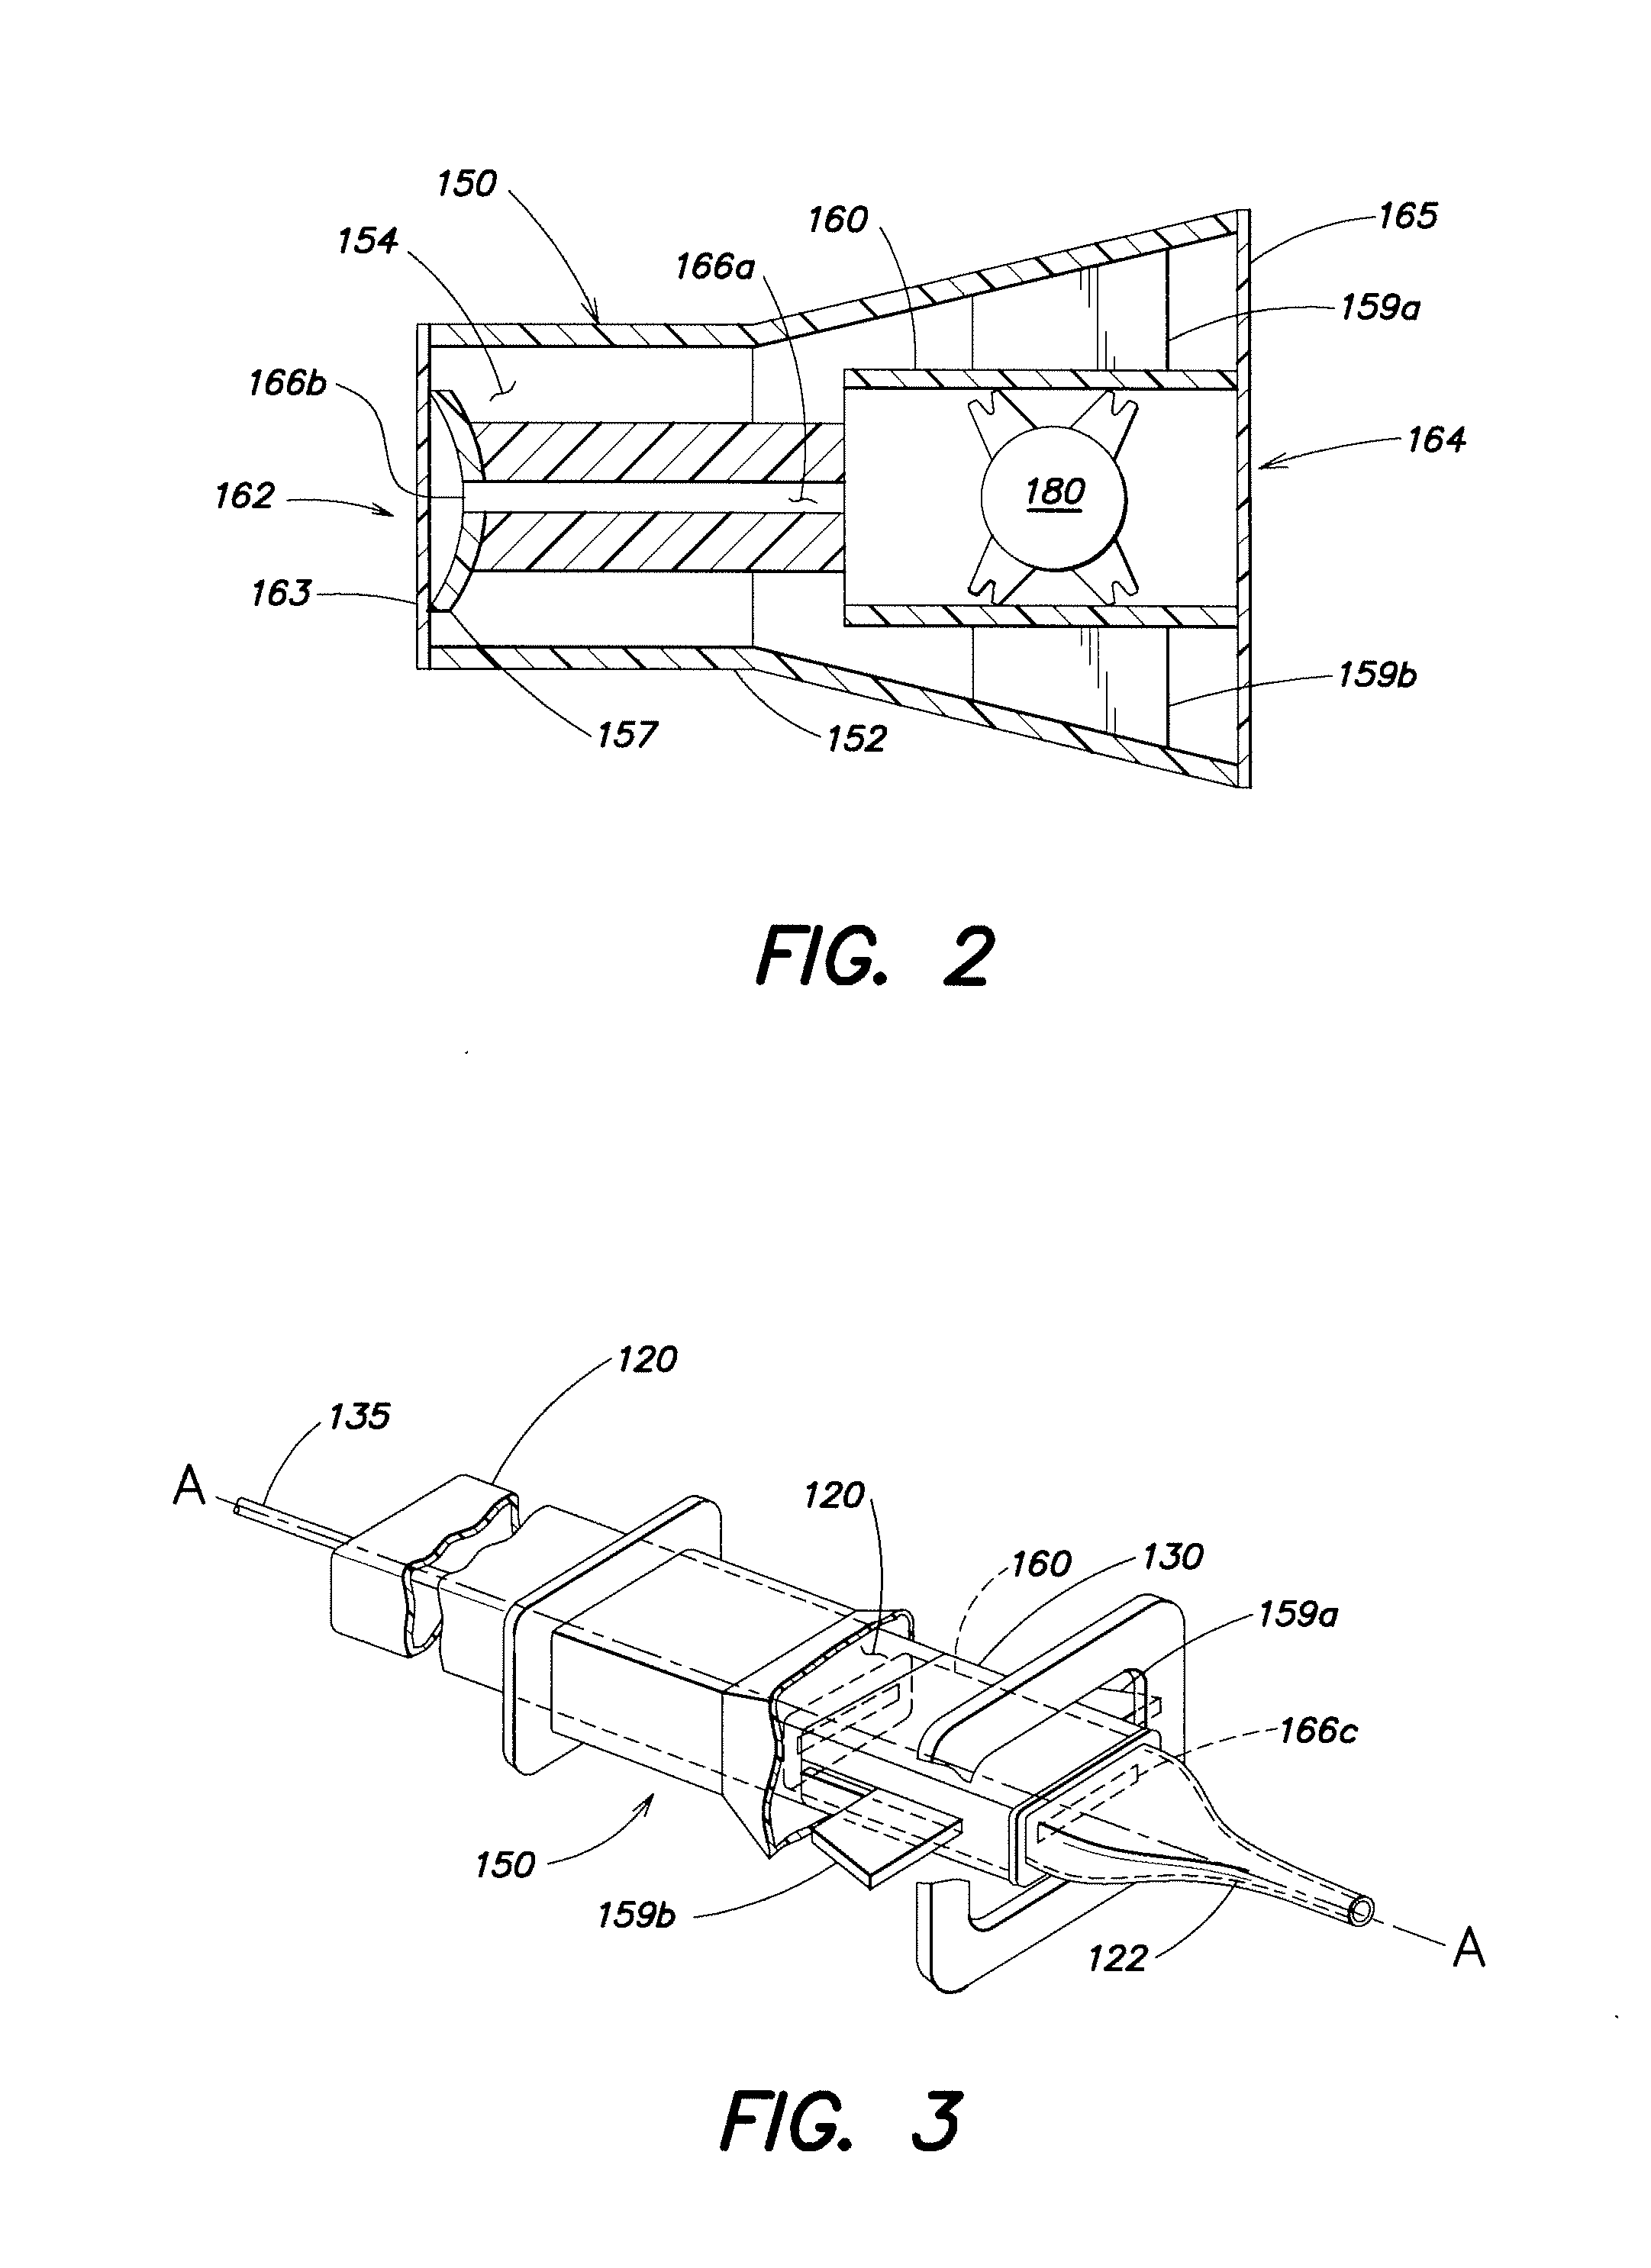 Intraocular lens injector apparatus and methods of use